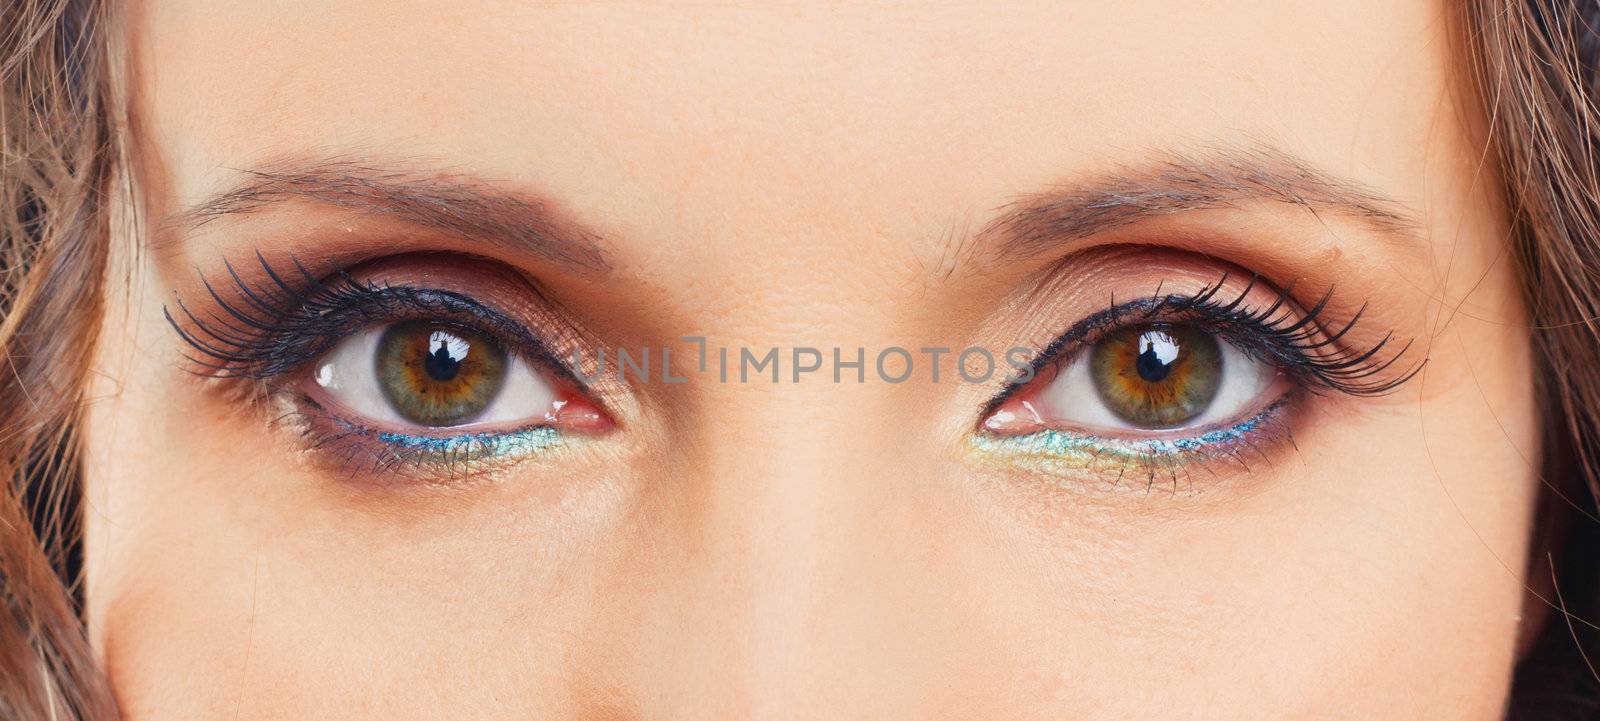 Beautiful eyes of the woman with fashion make-up by maxoliki